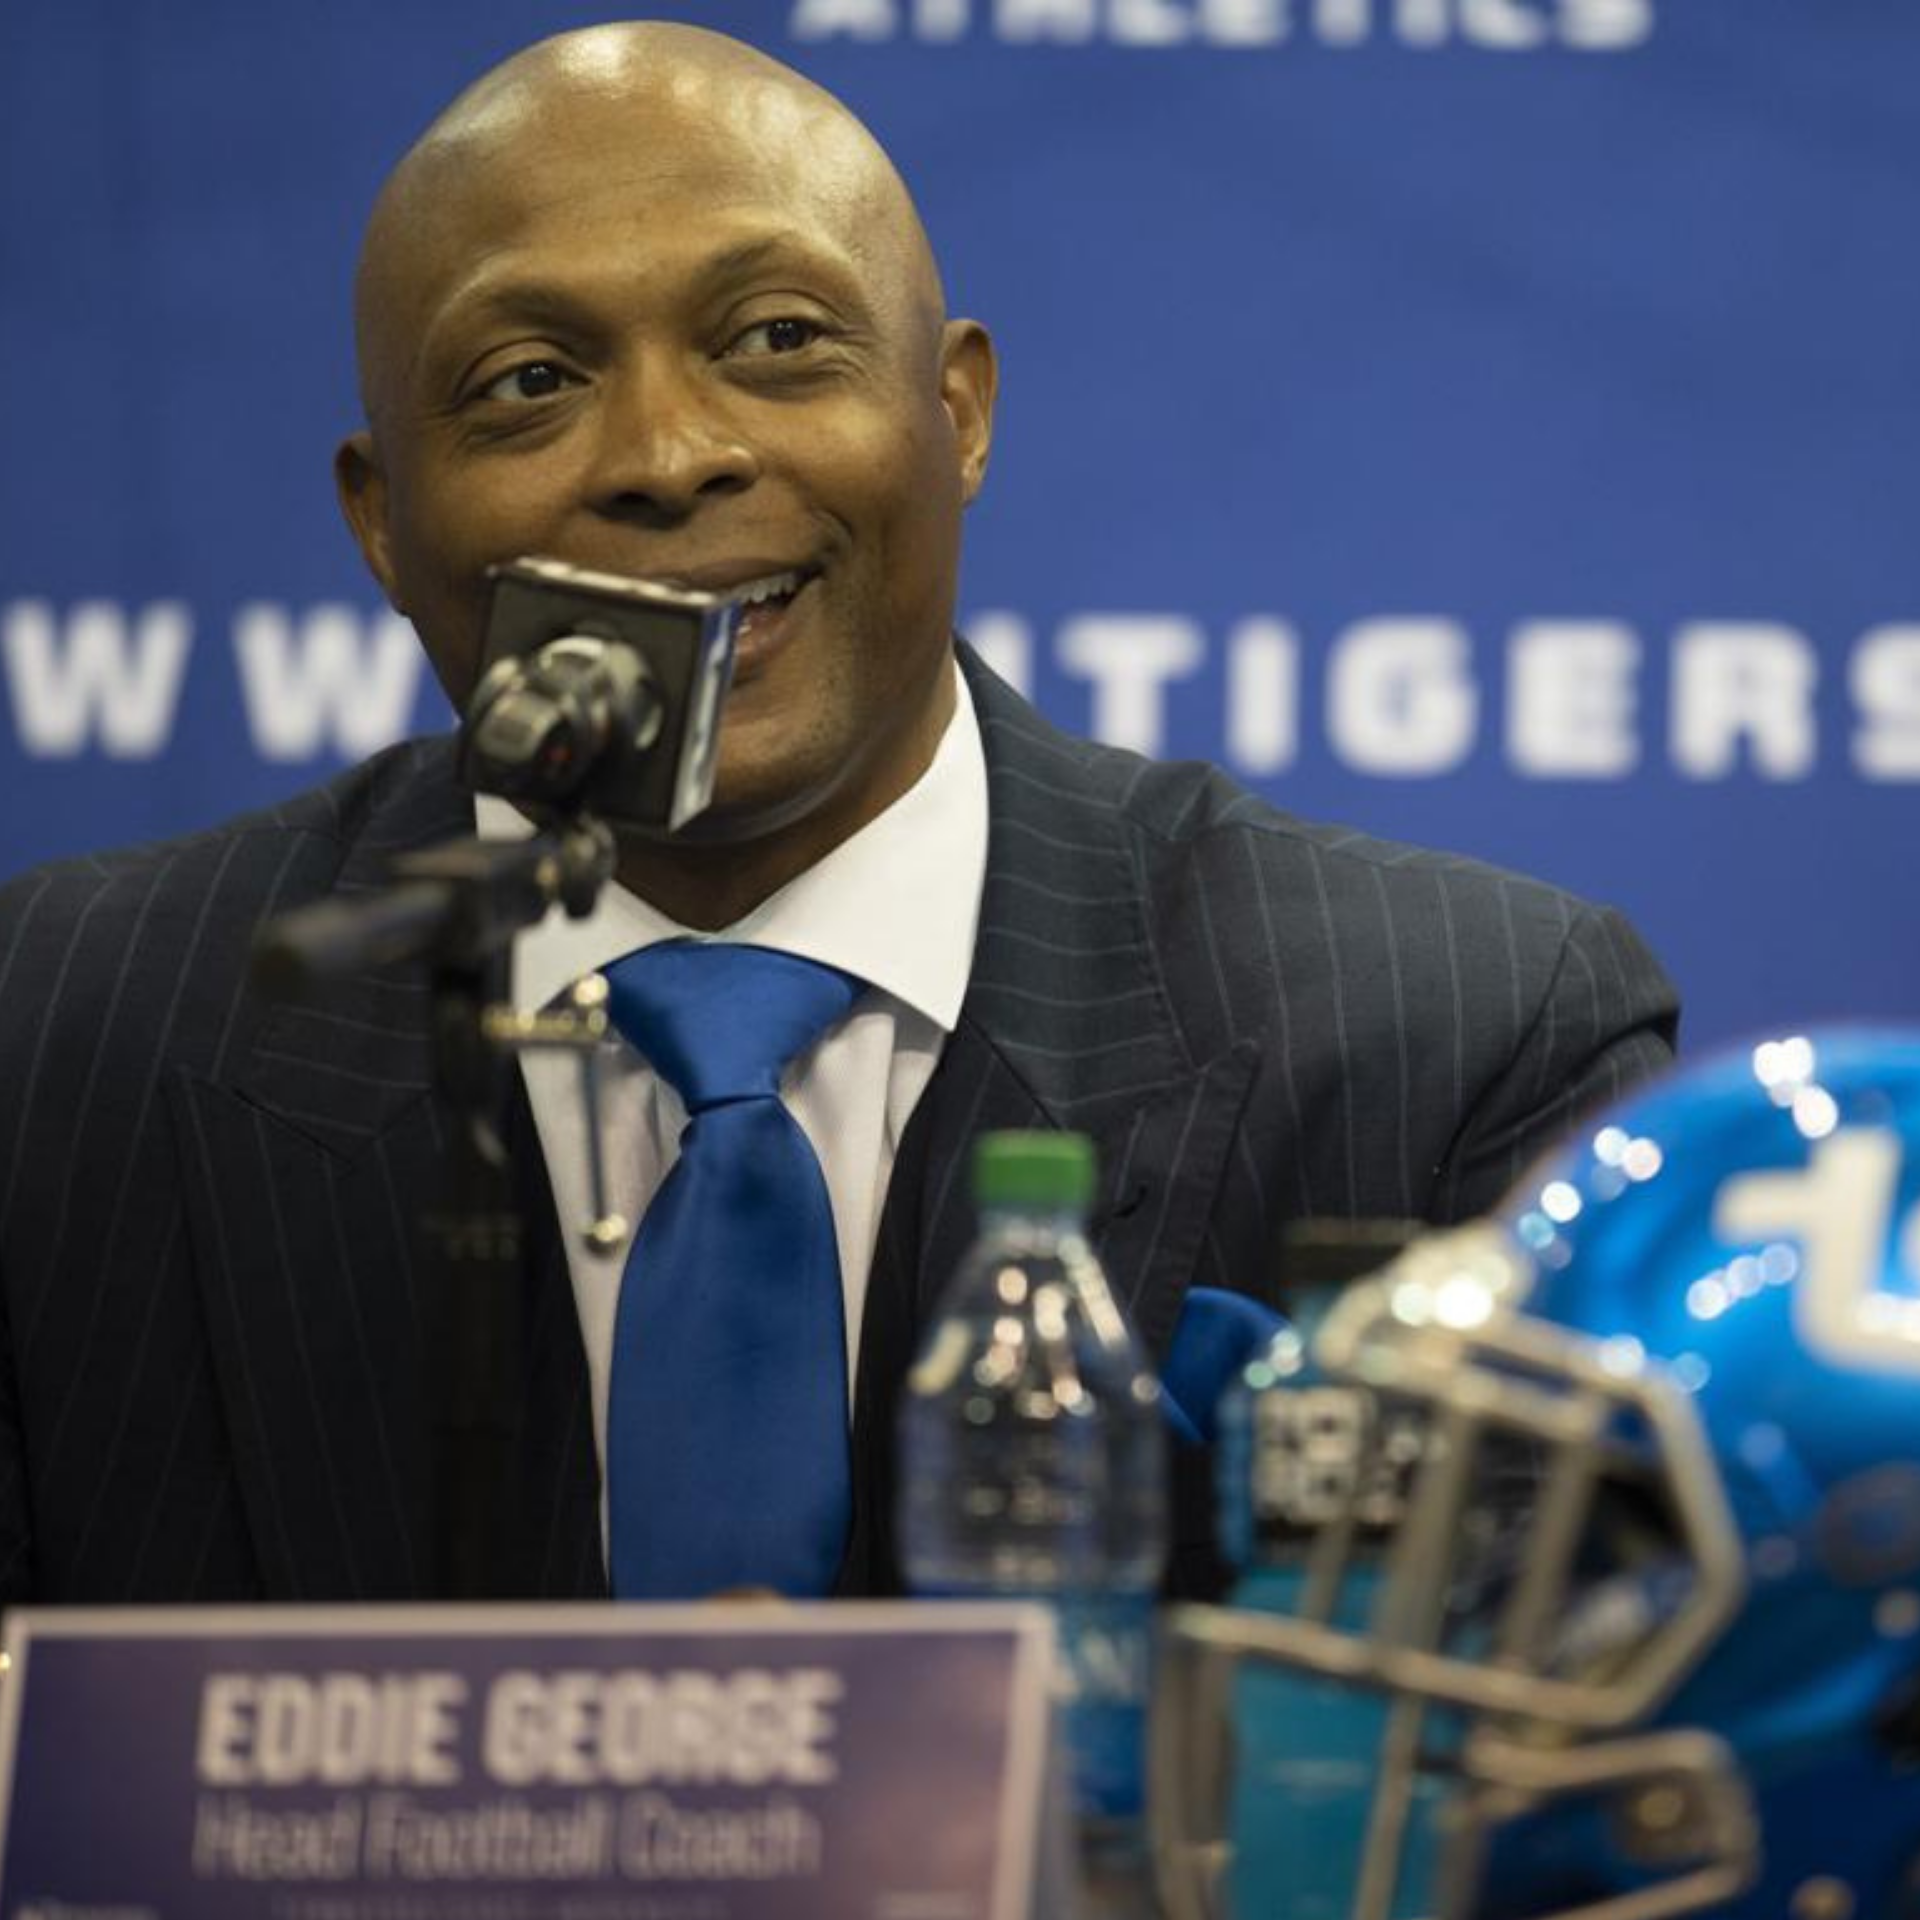 Eddie George, other former All-Pros, making impact at HBCUs